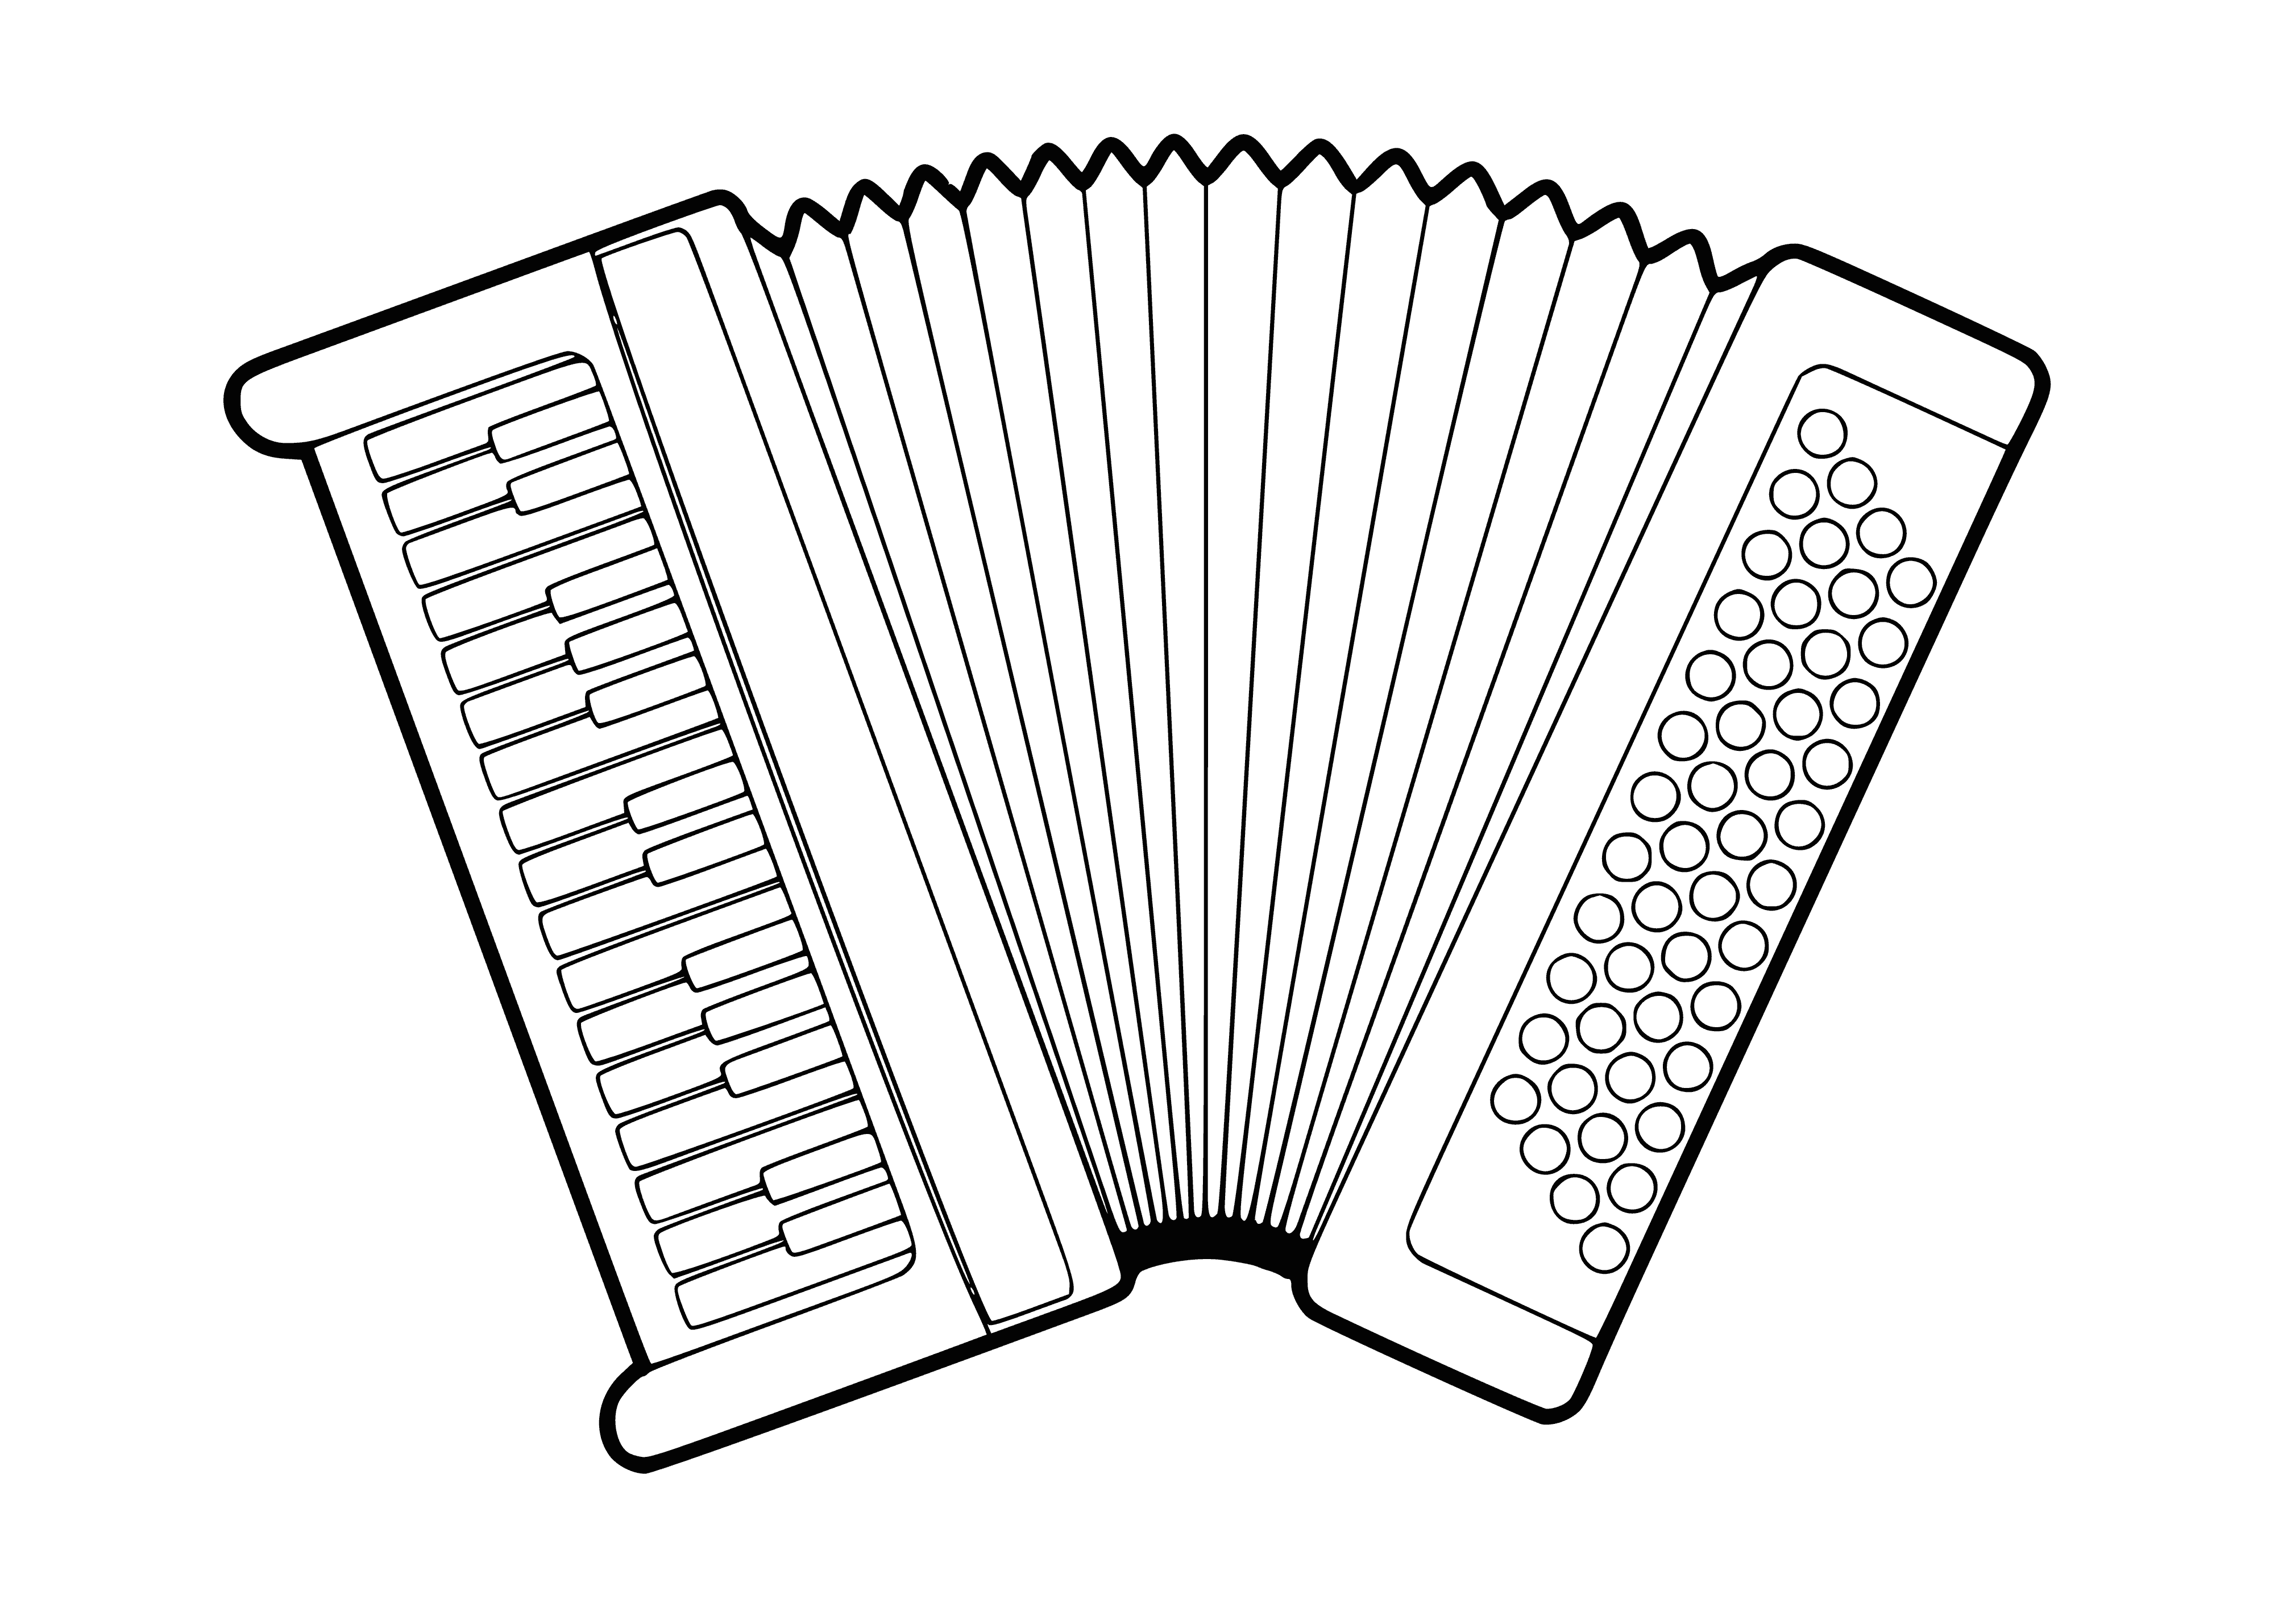 coloring page: Accordion is a musical instrument played by pressing buttons & pulling/pushing bellows to produce a range of pitches.